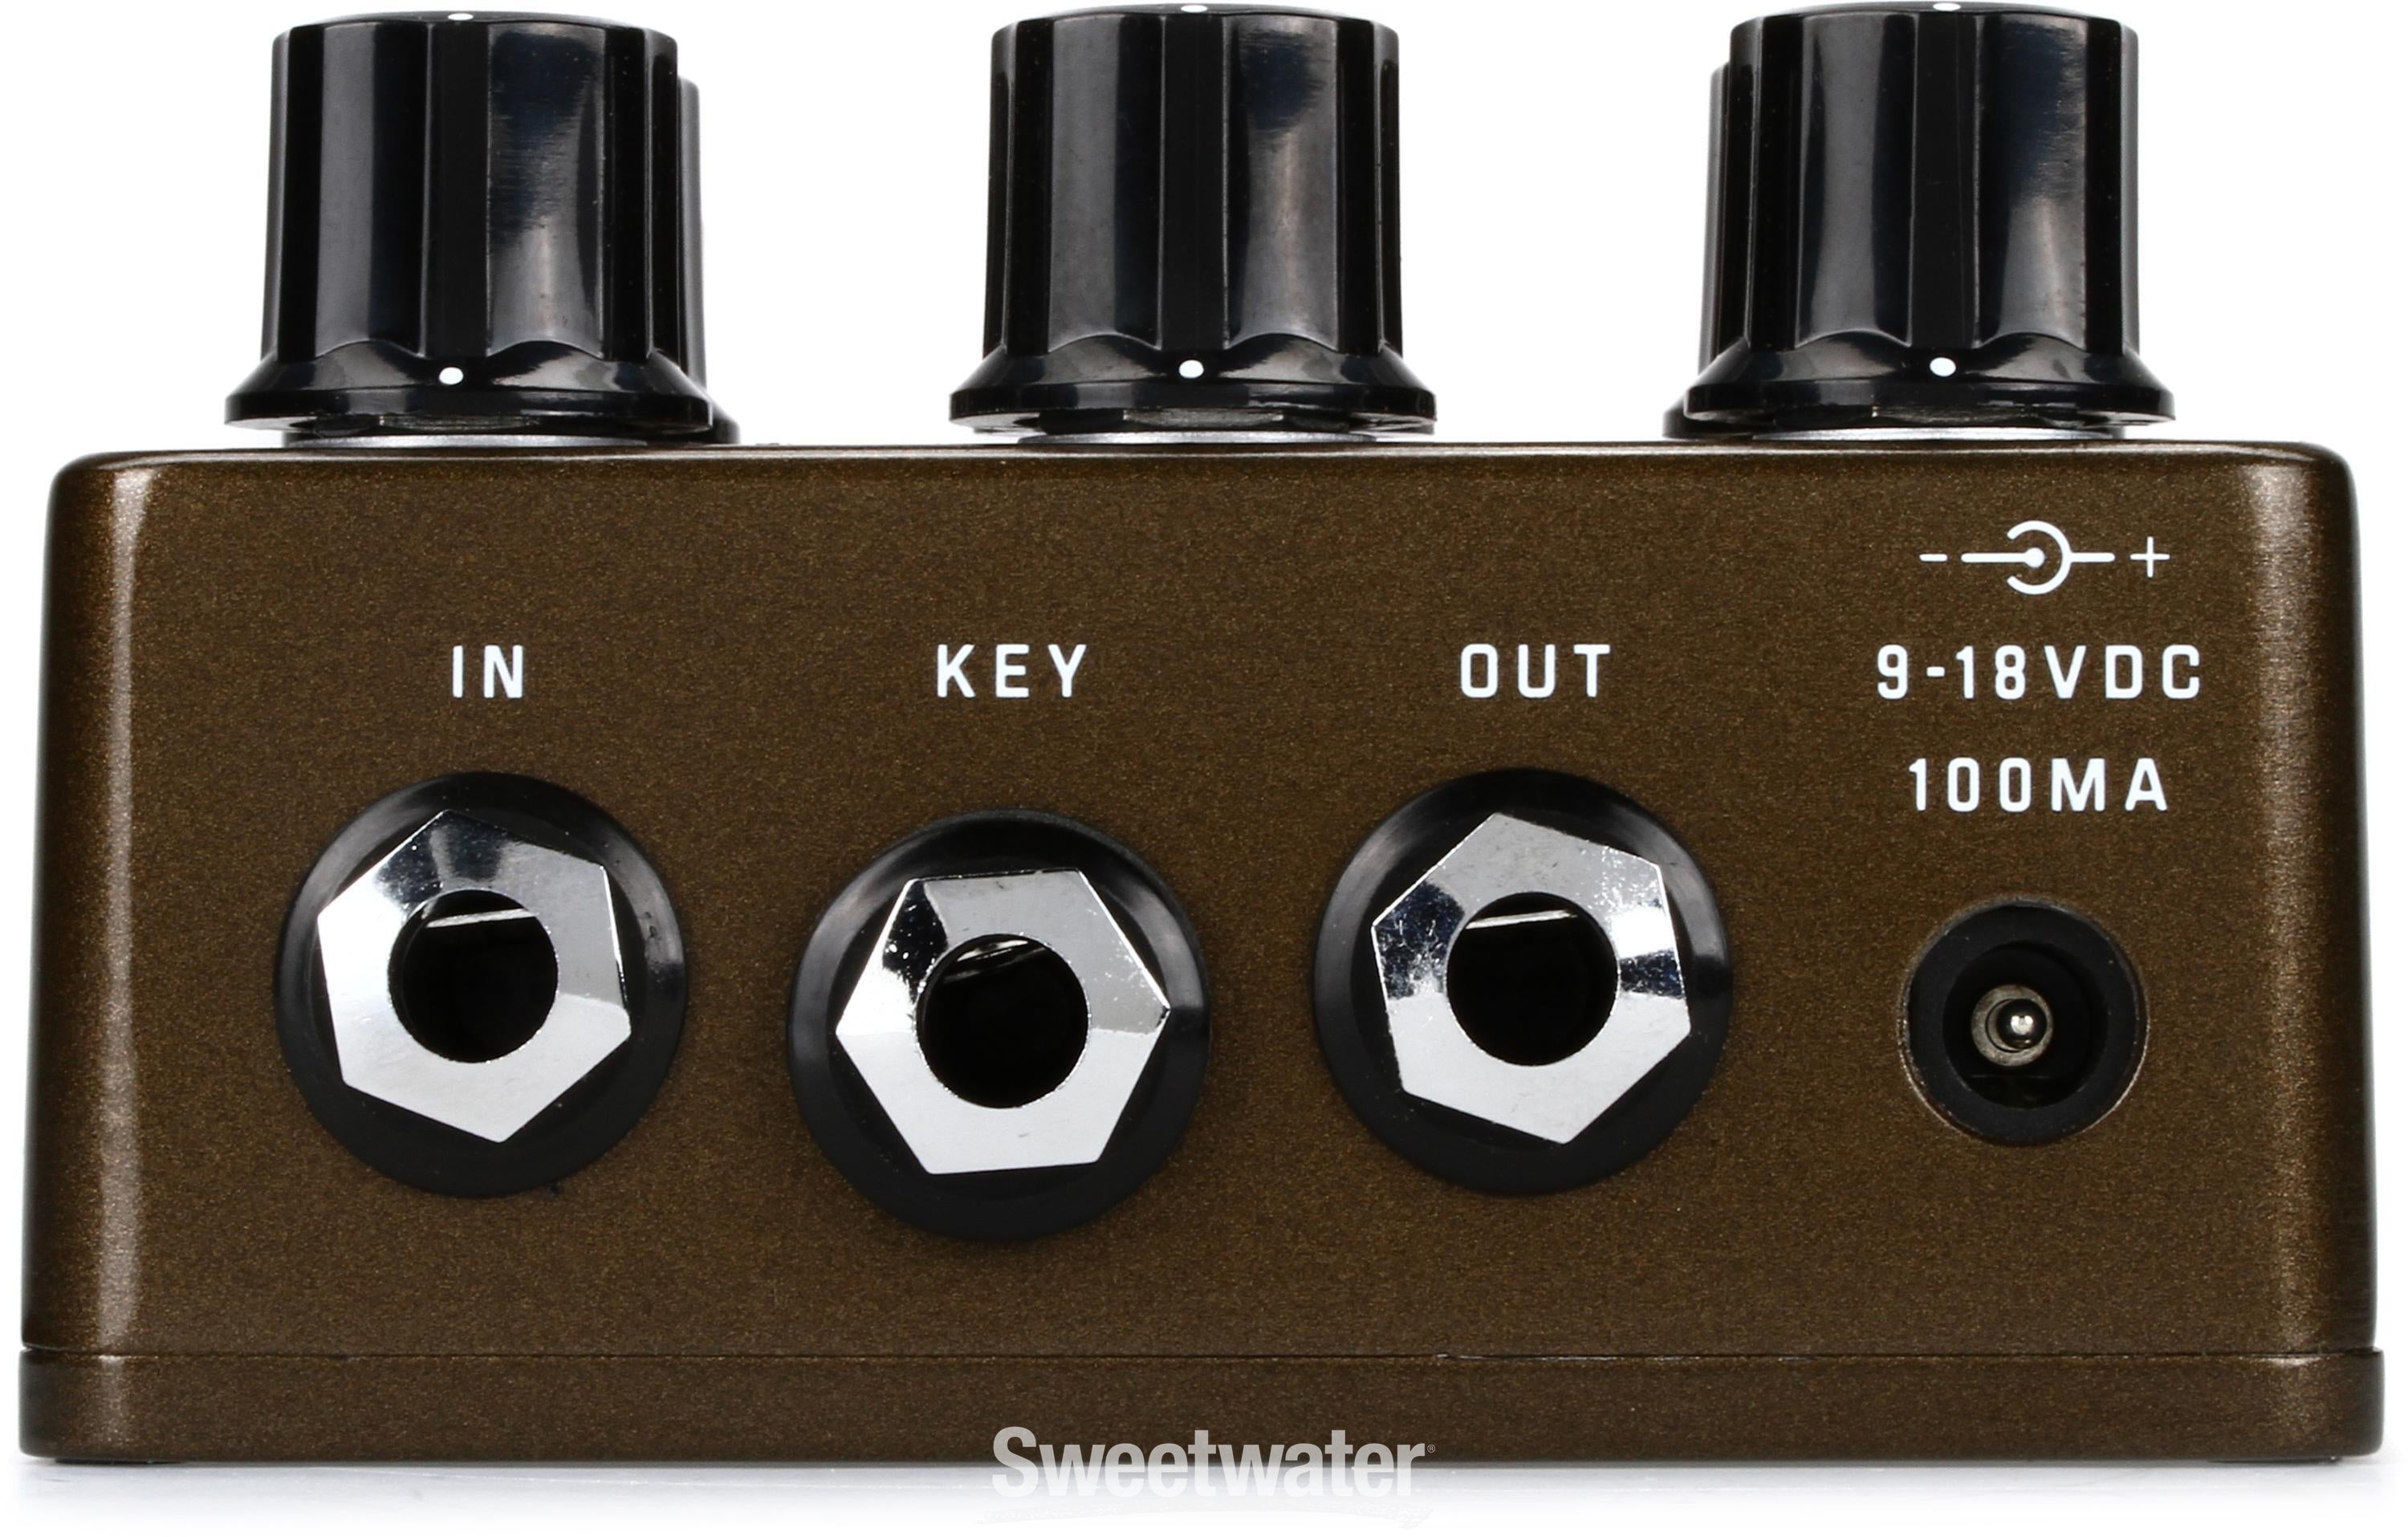 Seymour Duncan Polaron Analog Phase Shifter Pedal Reviews | Sweetwater